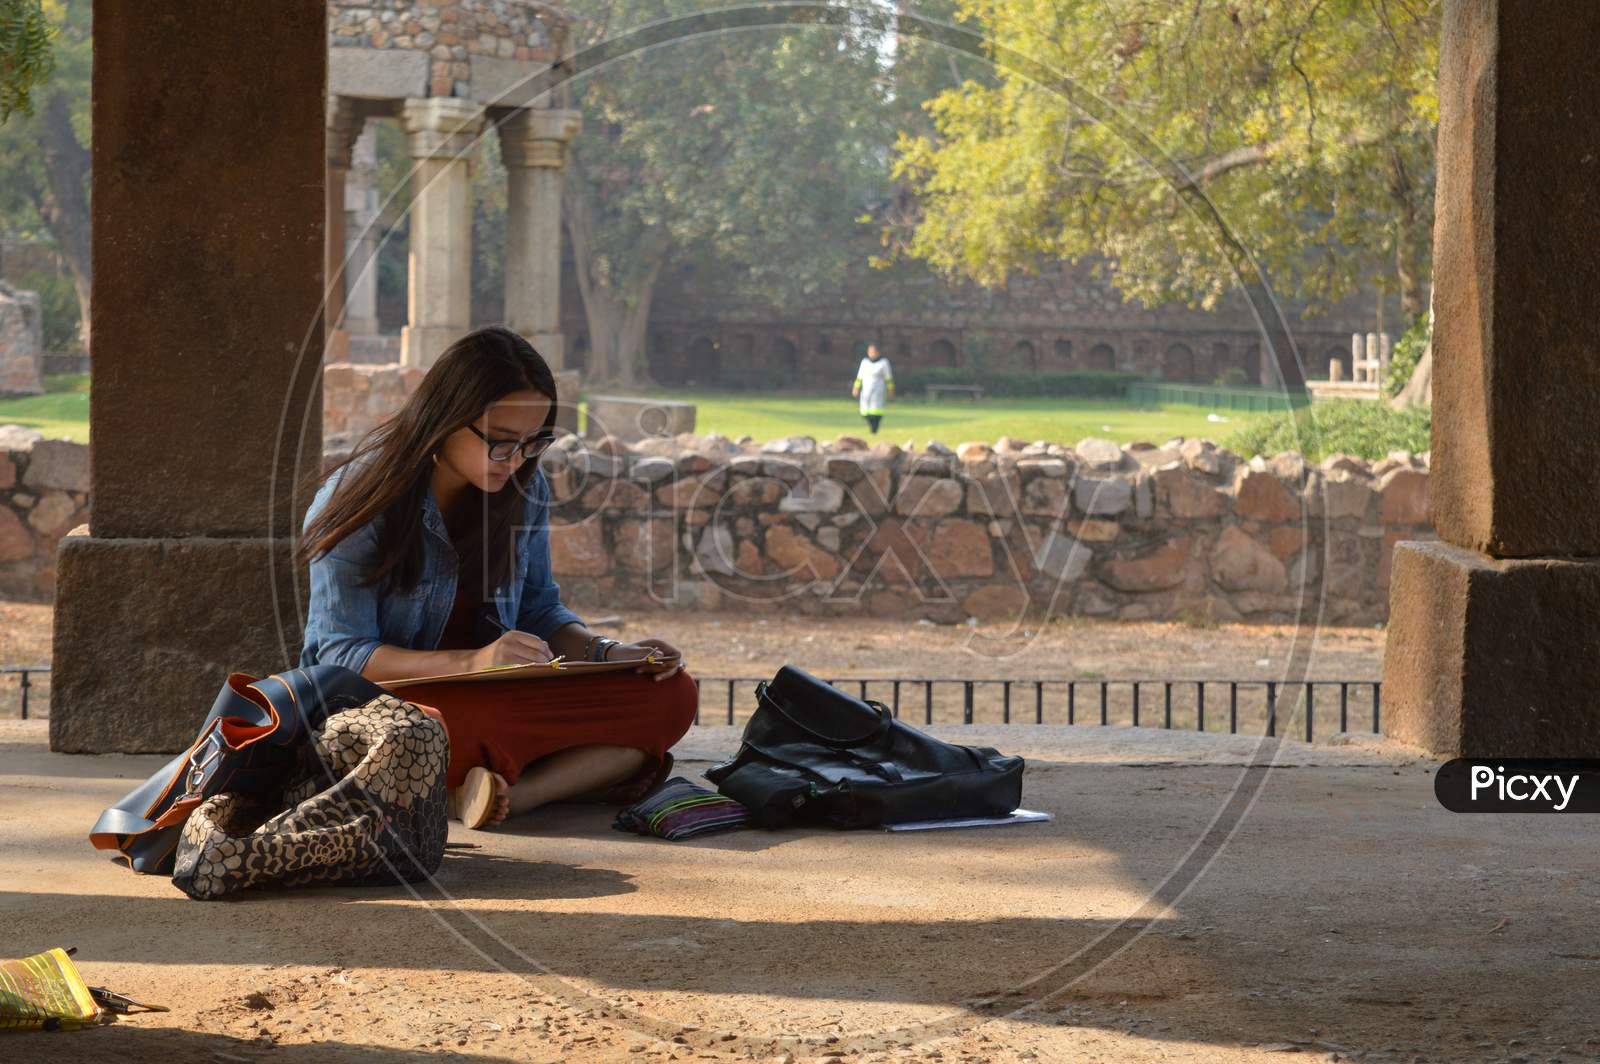 A Girl Is Drawing The Hauz Khas Monument And Garden From The Hauz Khas Fort At Hauz Khas Village At Winter Foggy Morning.